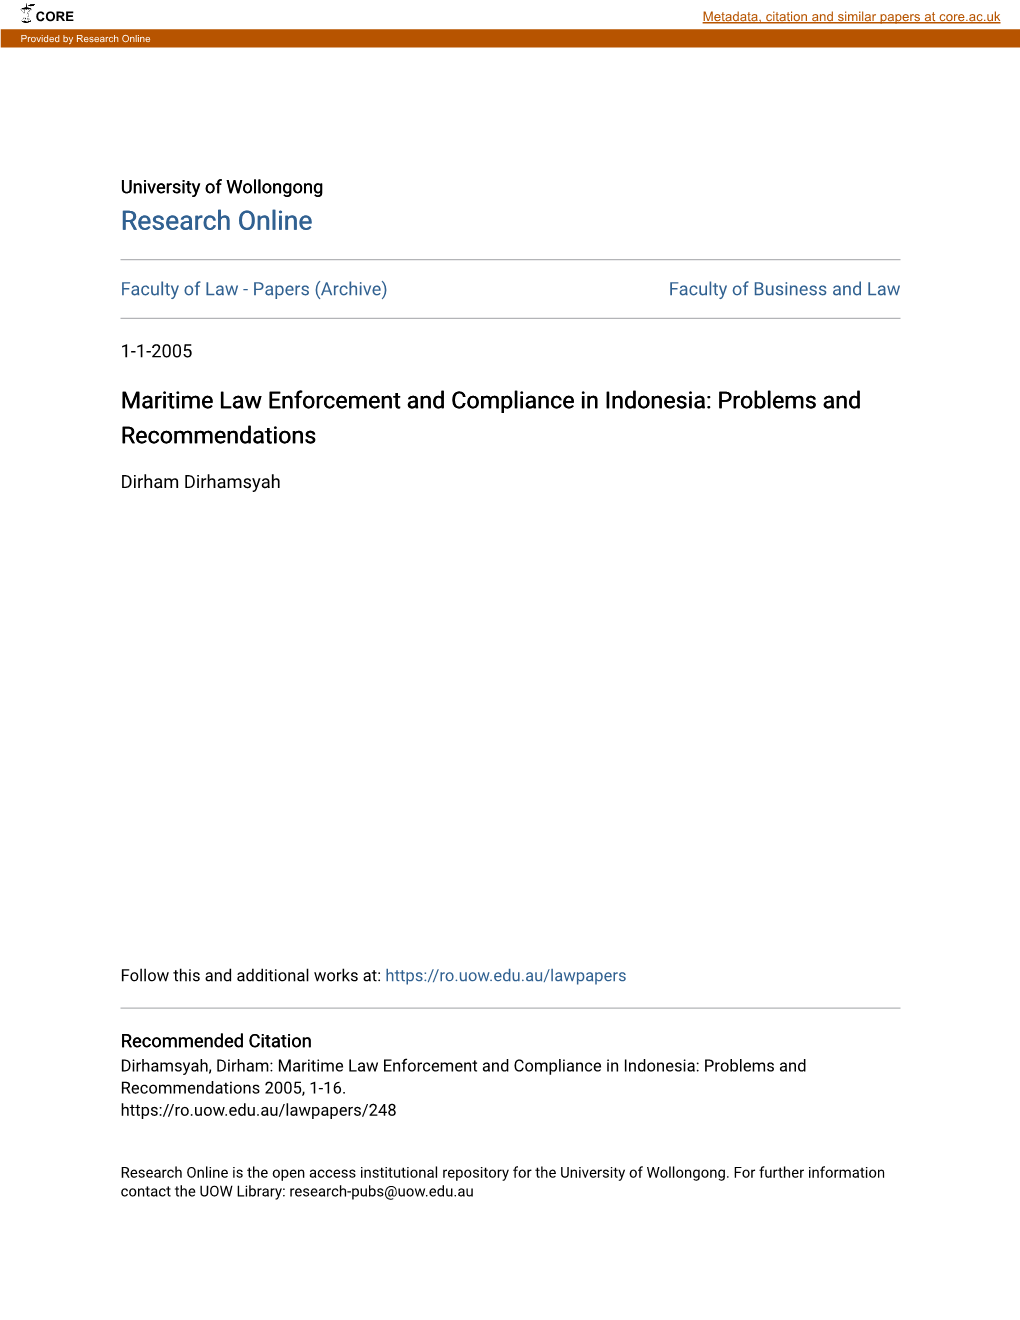 Maritime Law Enforcement and Compliance in Indonesia: Problems and Recommendations